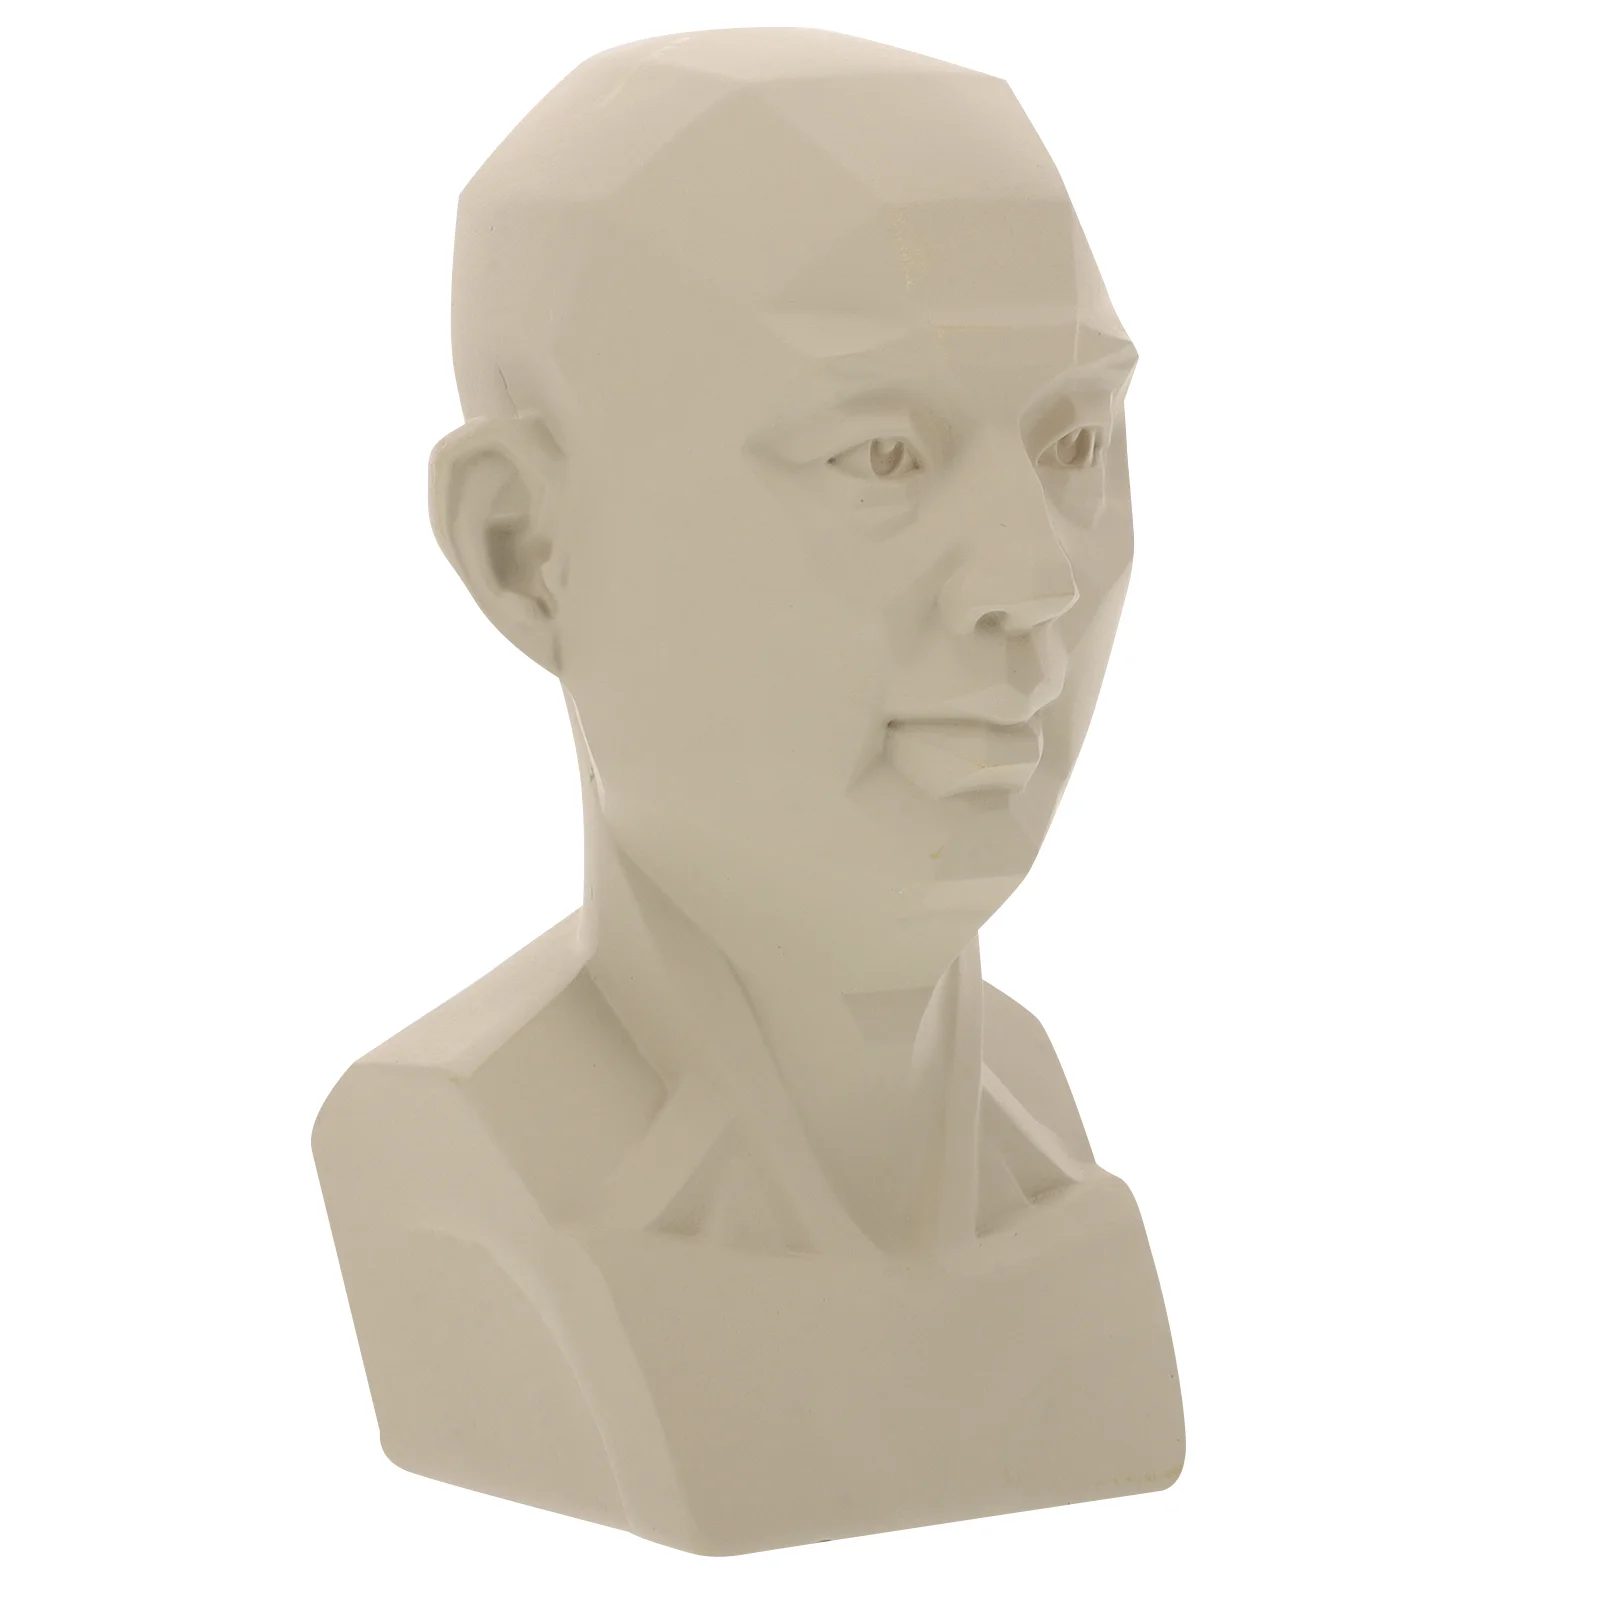 

Statue Sketch Avatar Teaching Aids Human Bust Model Practice Sculpture Ornaments Drawing Mold Life Resin Middle Aged